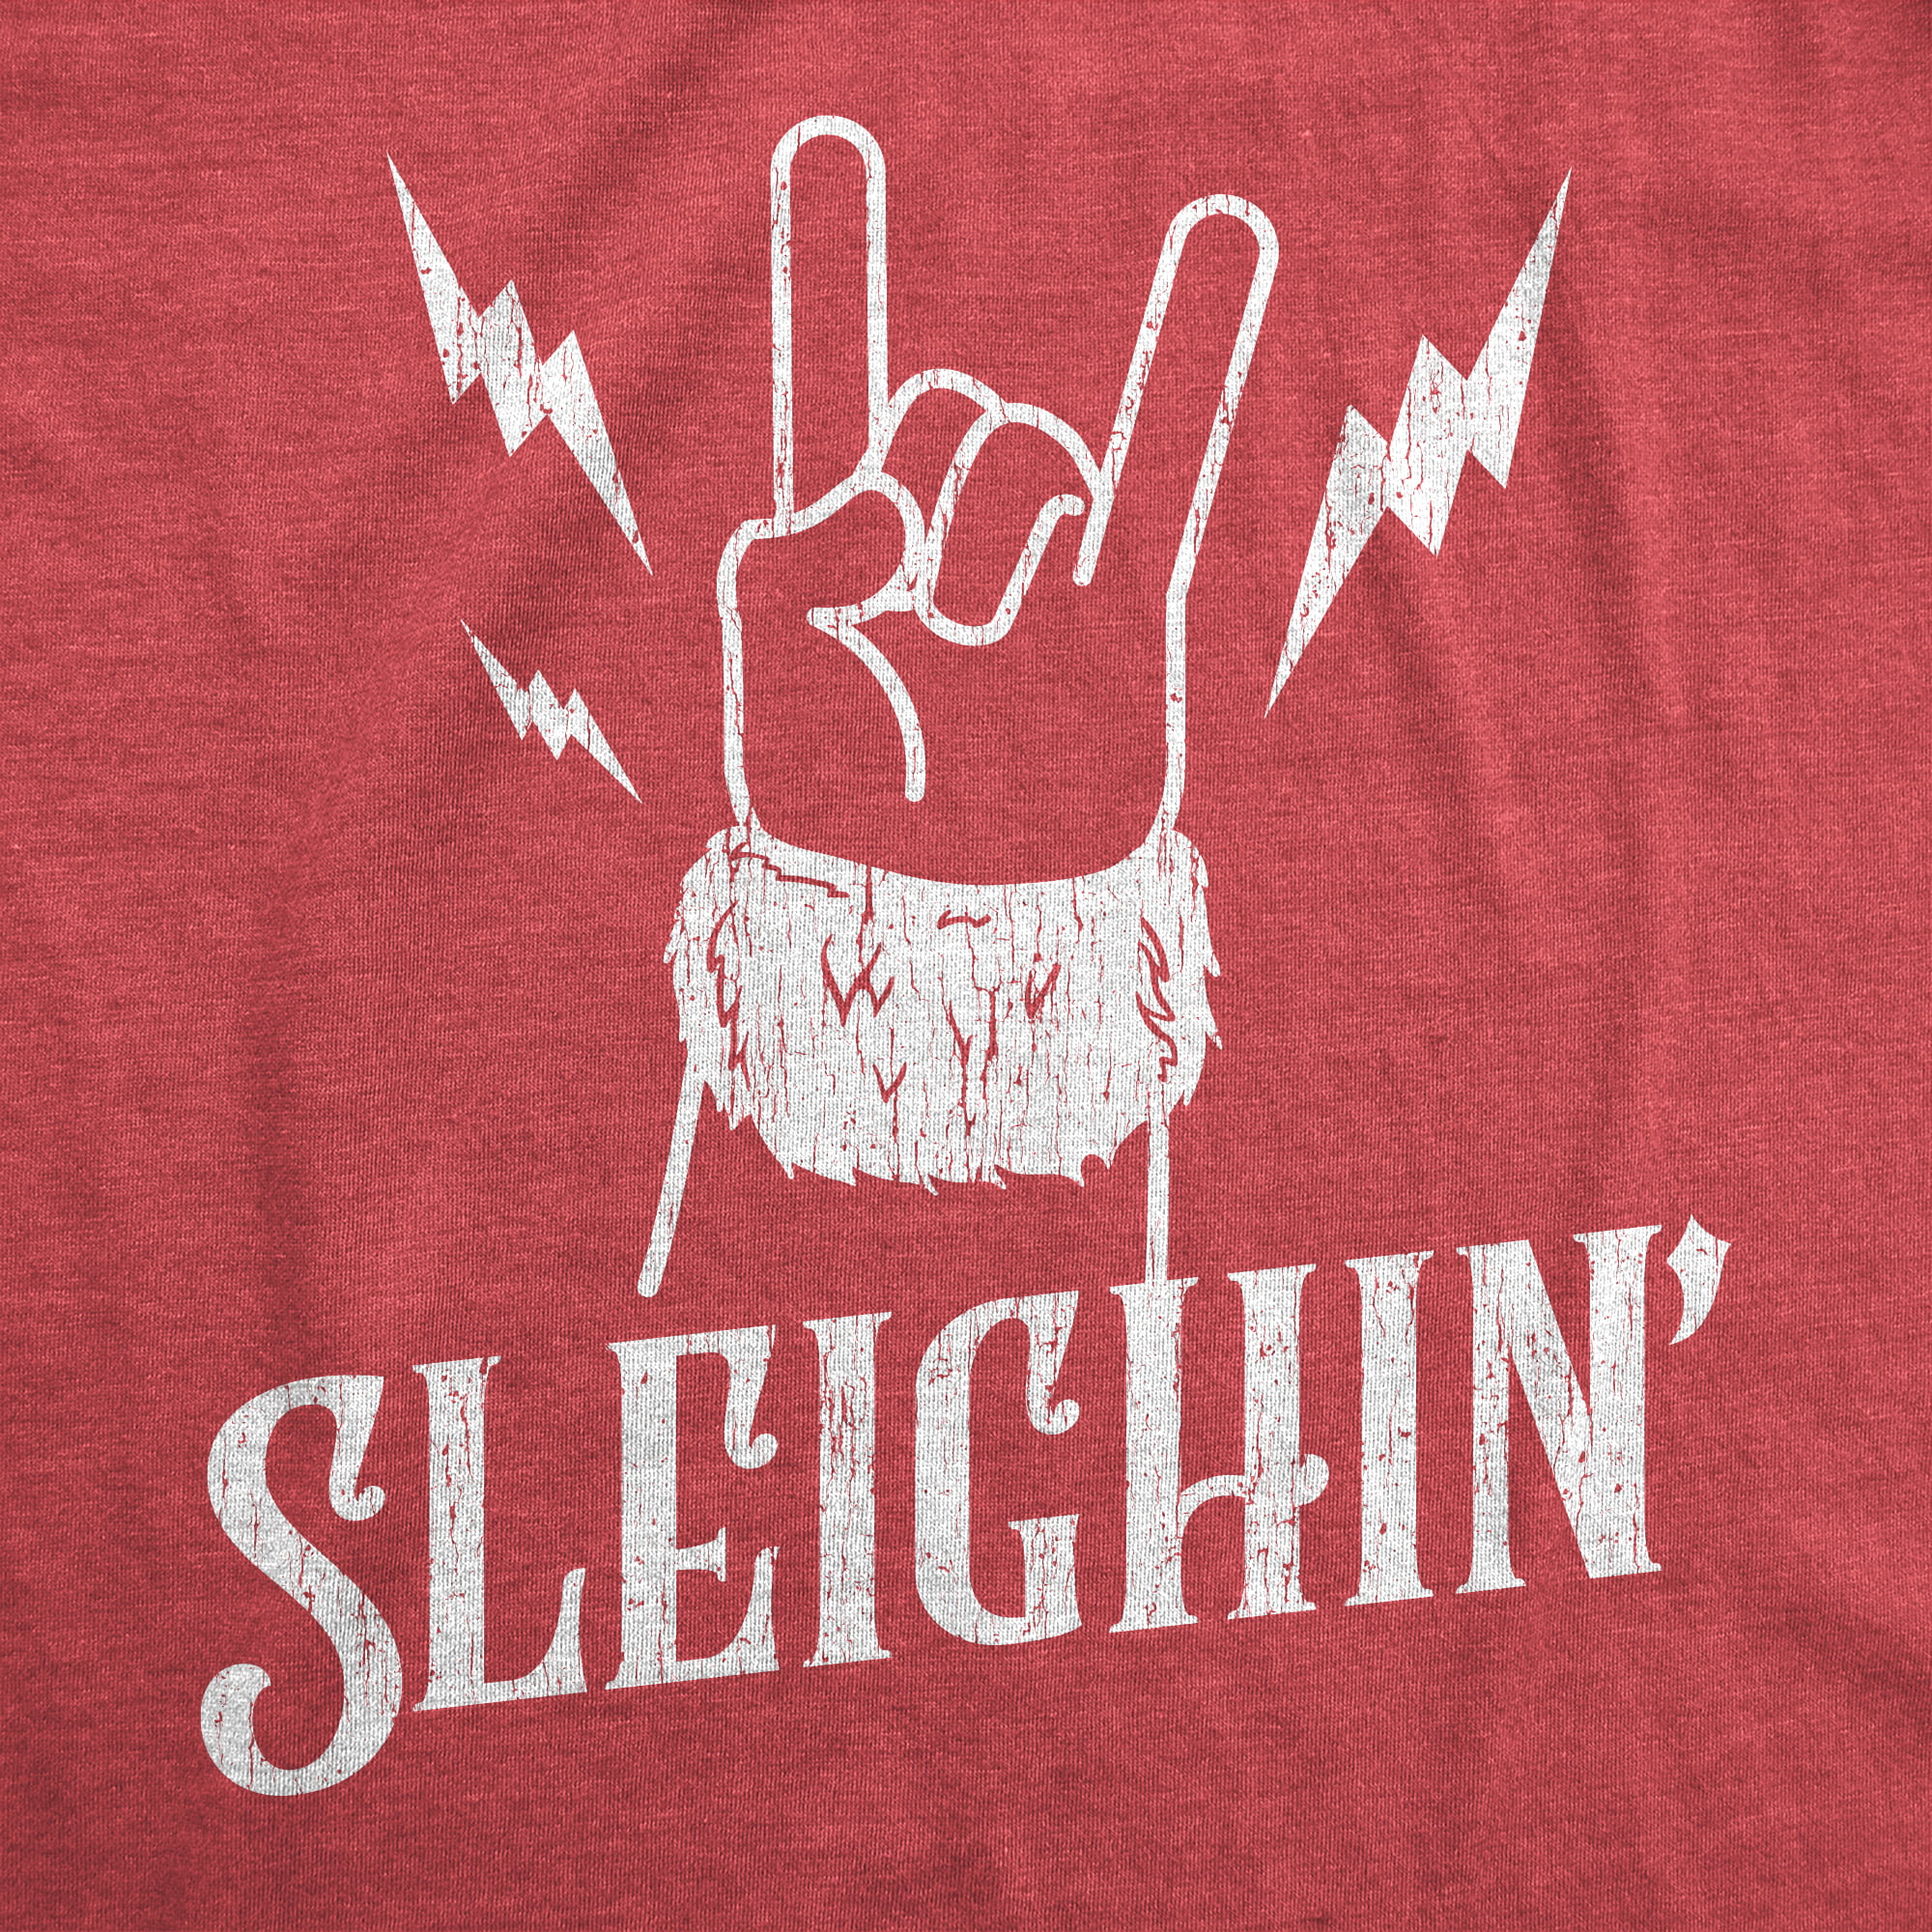 Mens Sleighin Tshirt Funny Santa Claus Christmas Rock And Roll Metal  Fingers Graphic Tee (Heather Red) - S Graphic Tees